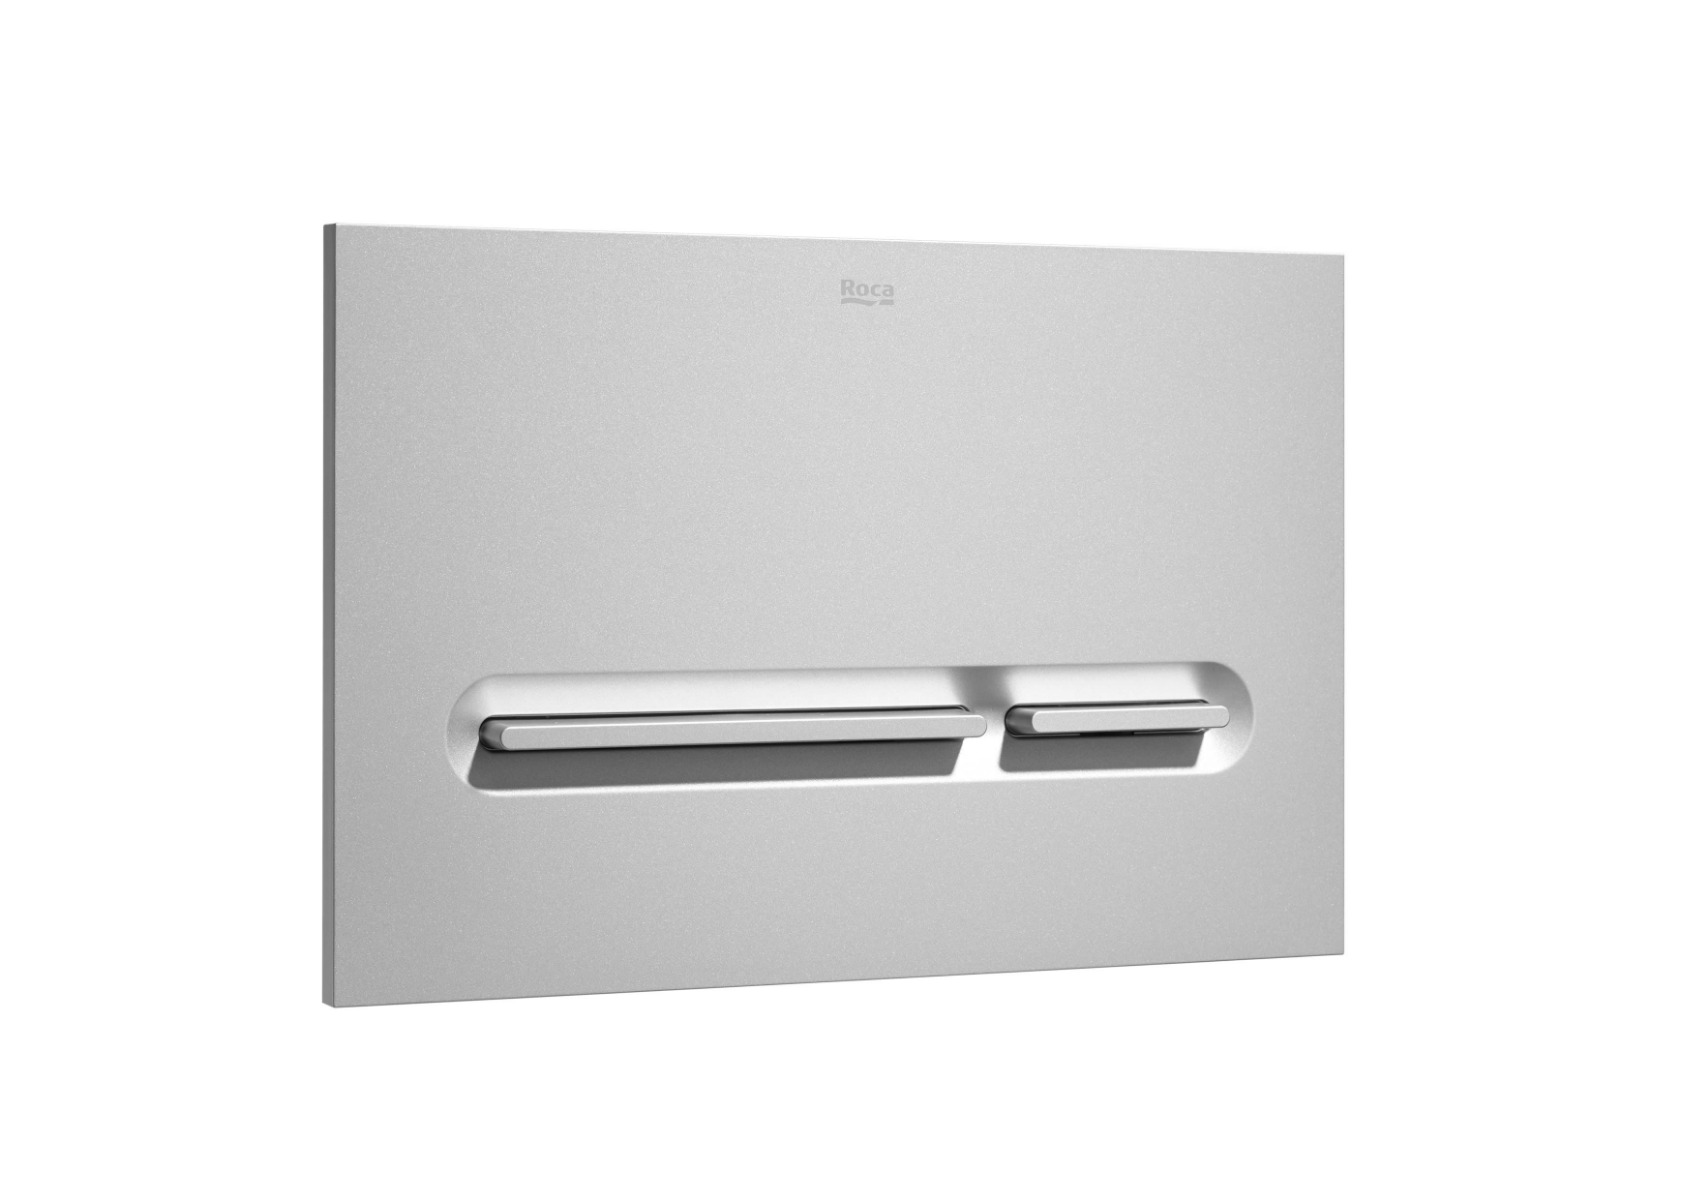 PL5 DUAL - Dual flush operating plate for concealed cistern grey lacquer